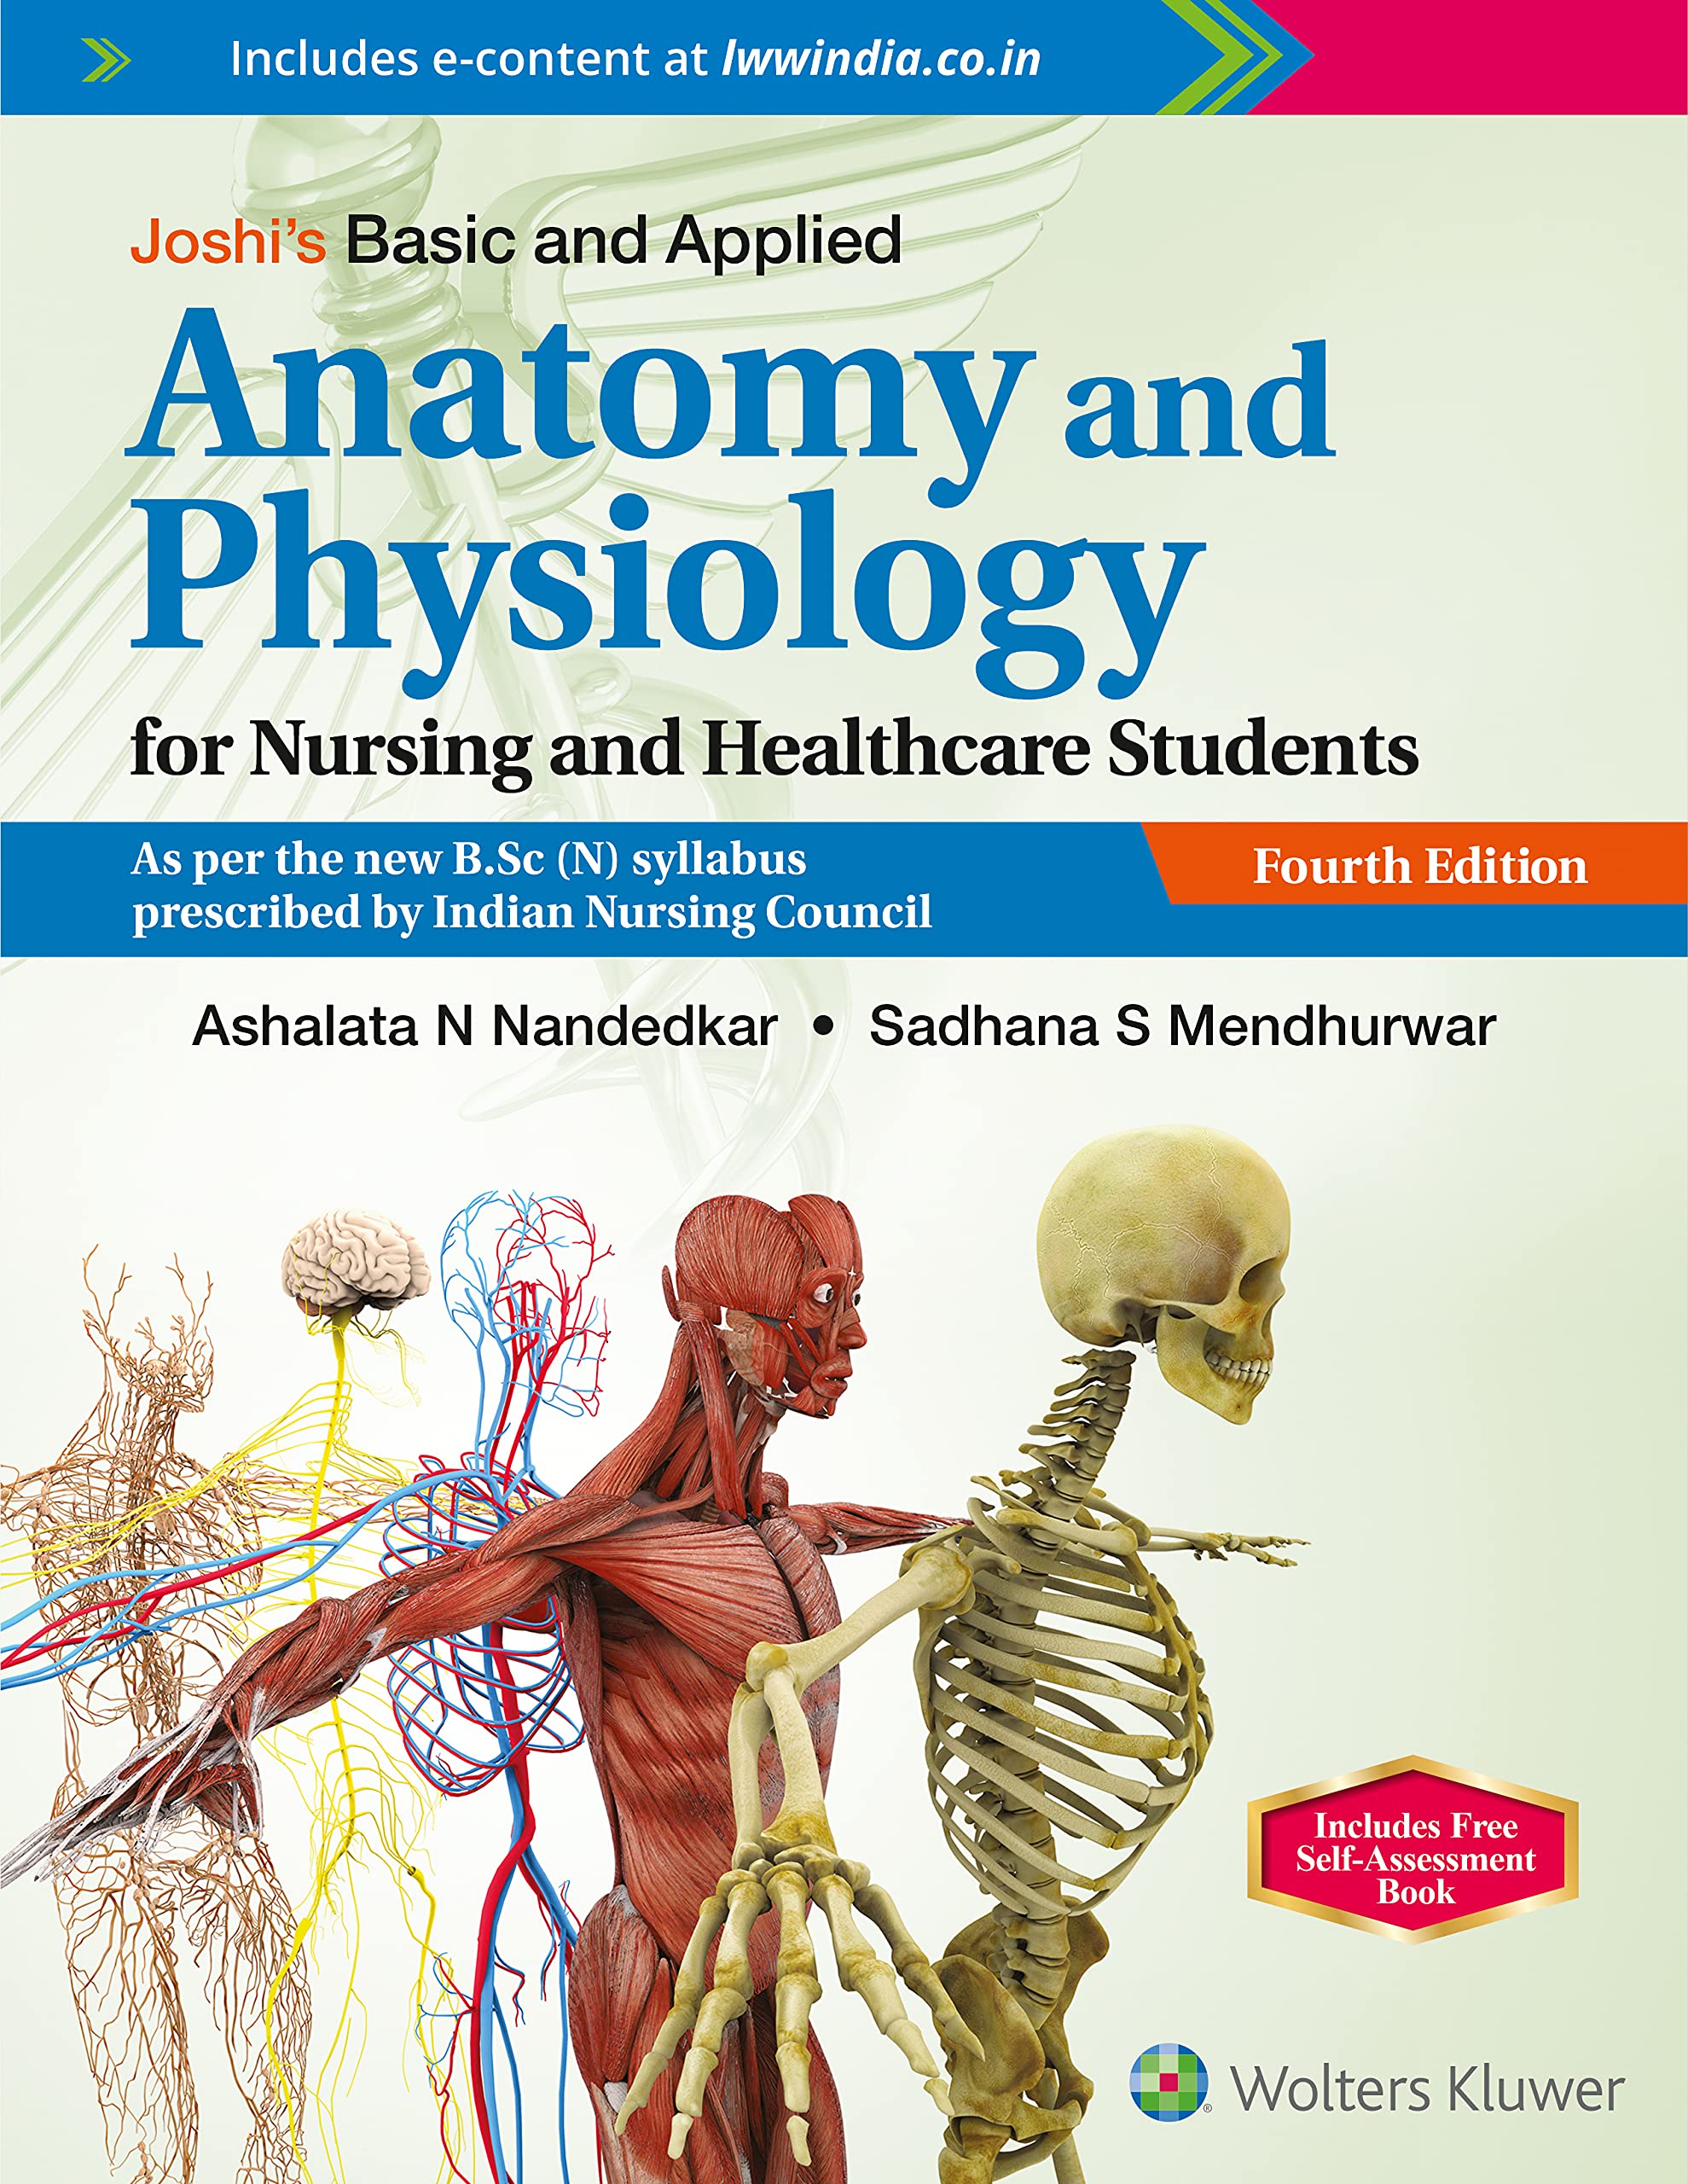 Joshi’s Basic and Applied Anatomy and Physiology for nursing and healthcare students, 4/e + Free Self-Assessment book: Vol. 2